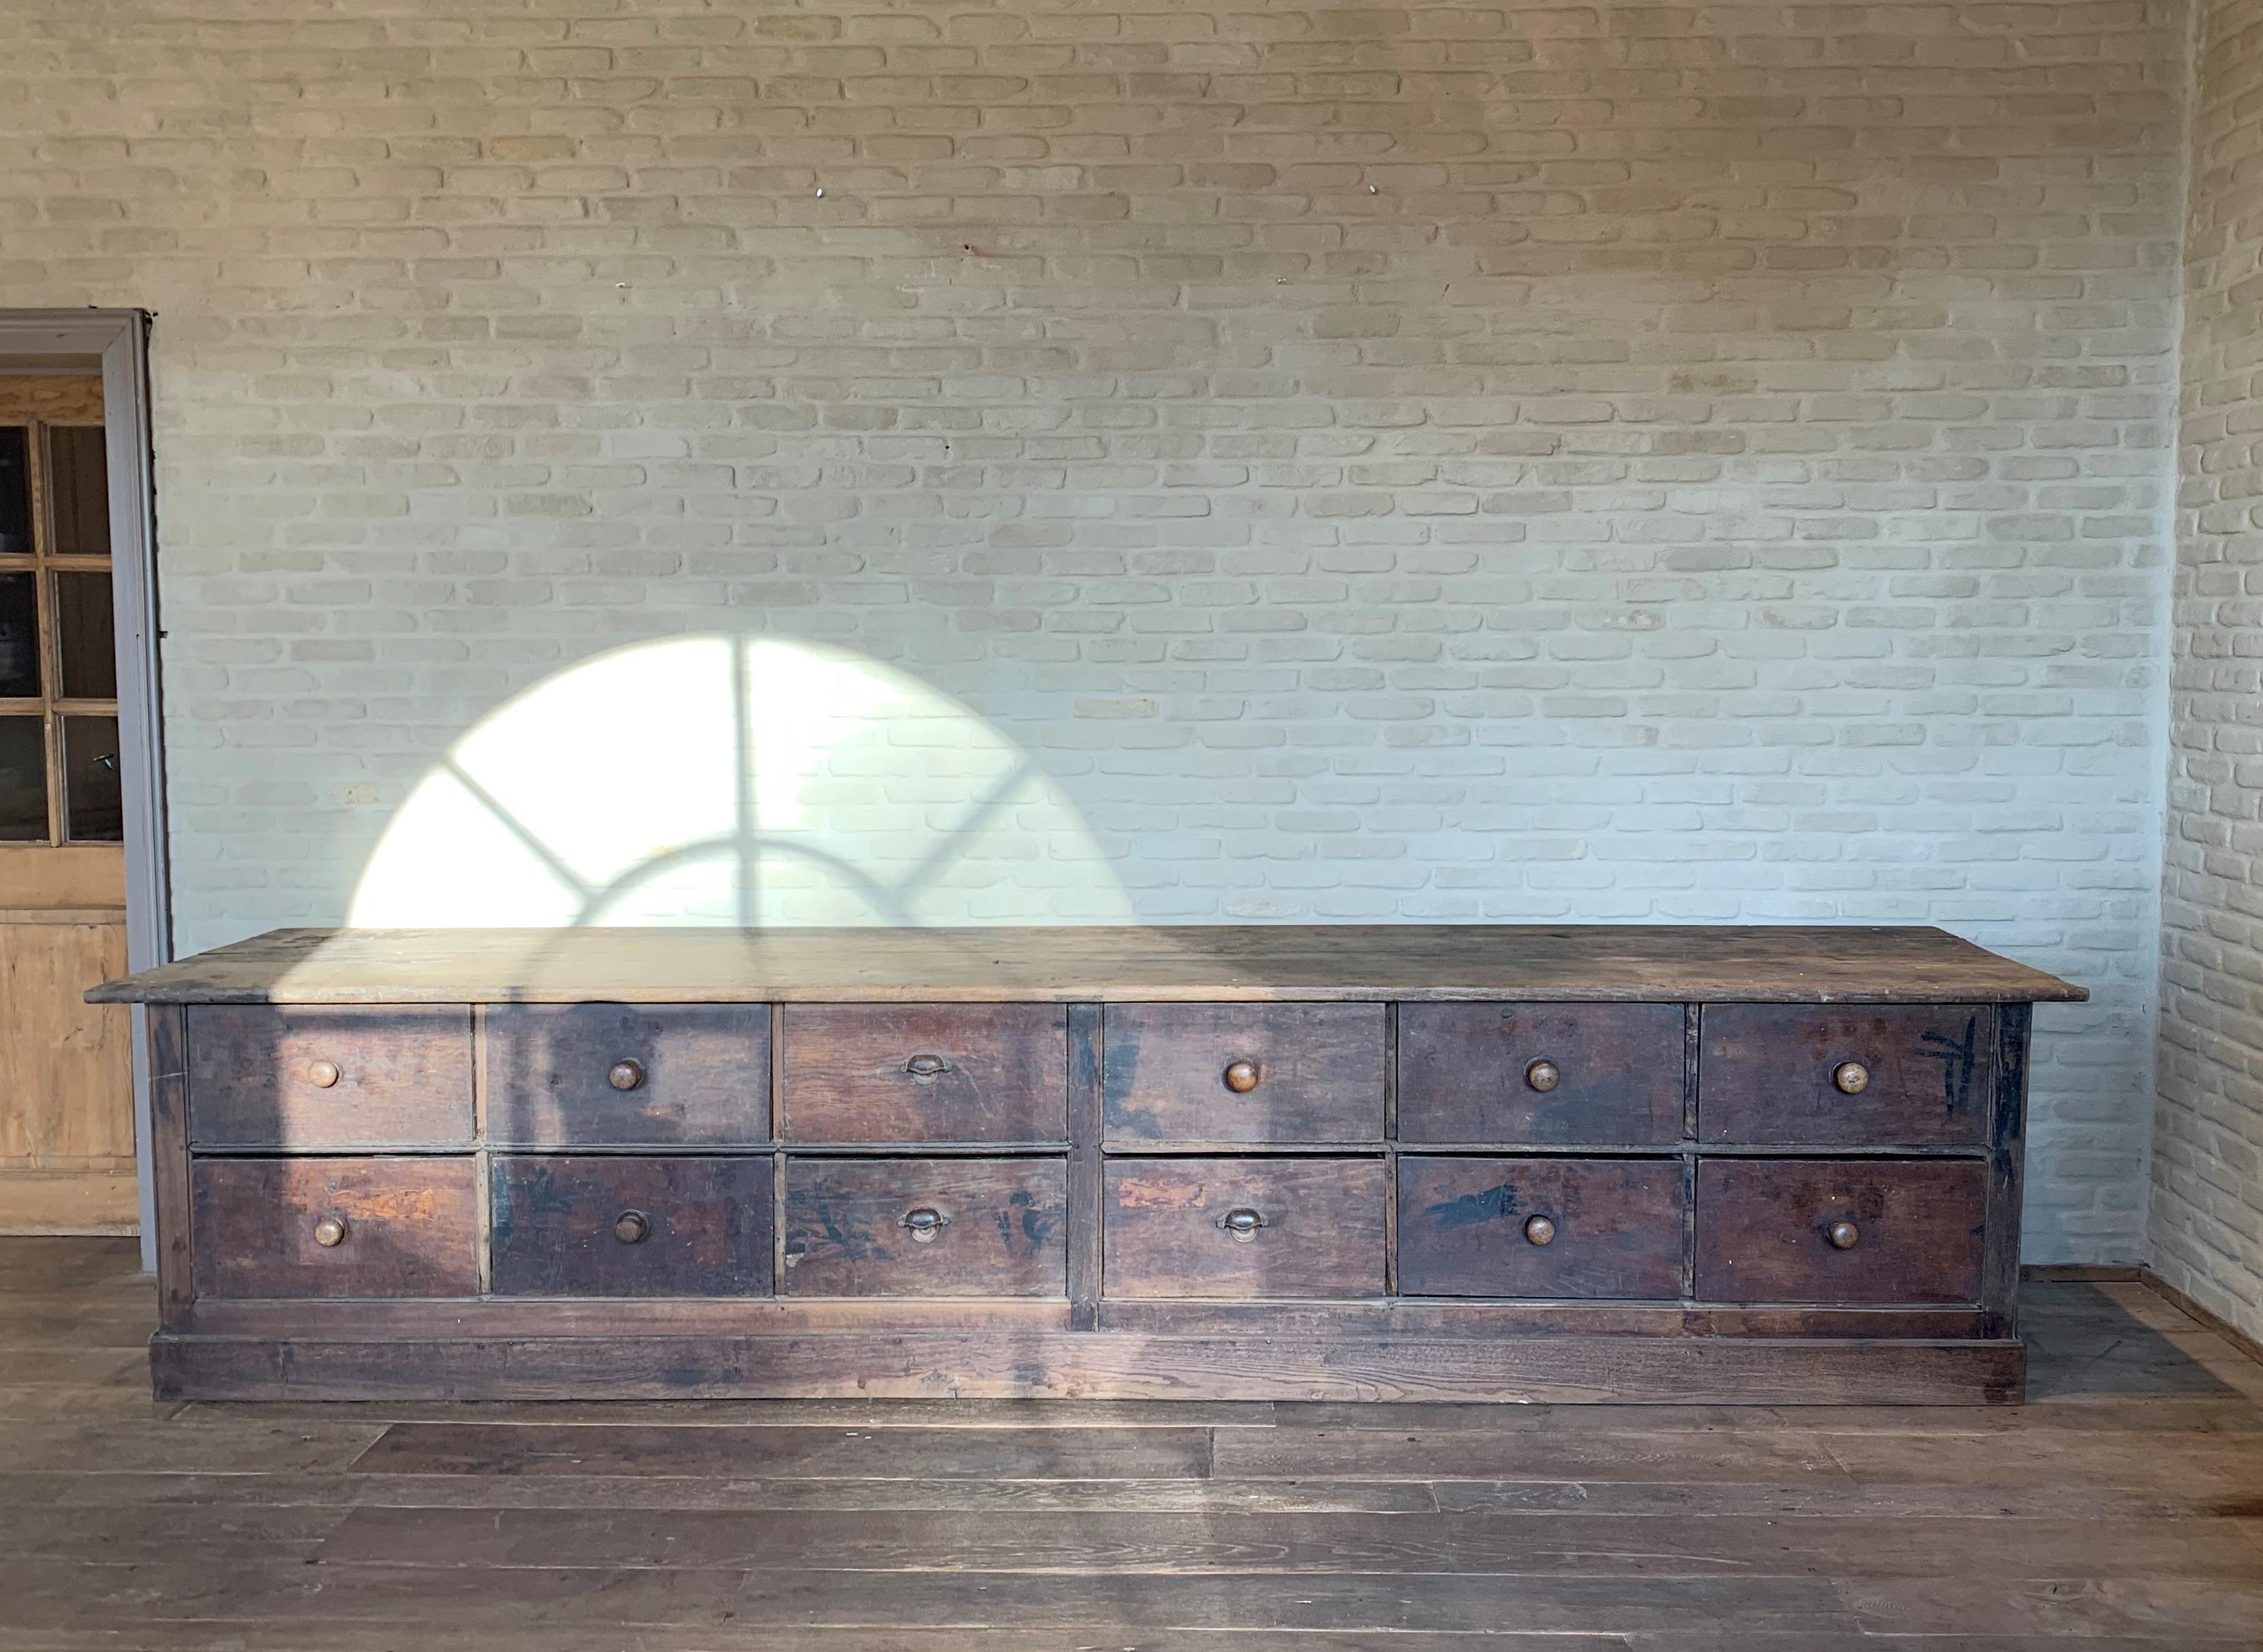 This massive chest of drawers probably started life as a custom shop or apothecary counter. The back and sides are panneled and retain the faded original paint. These pieces are rare to find and certainly with all drawers original. The top has